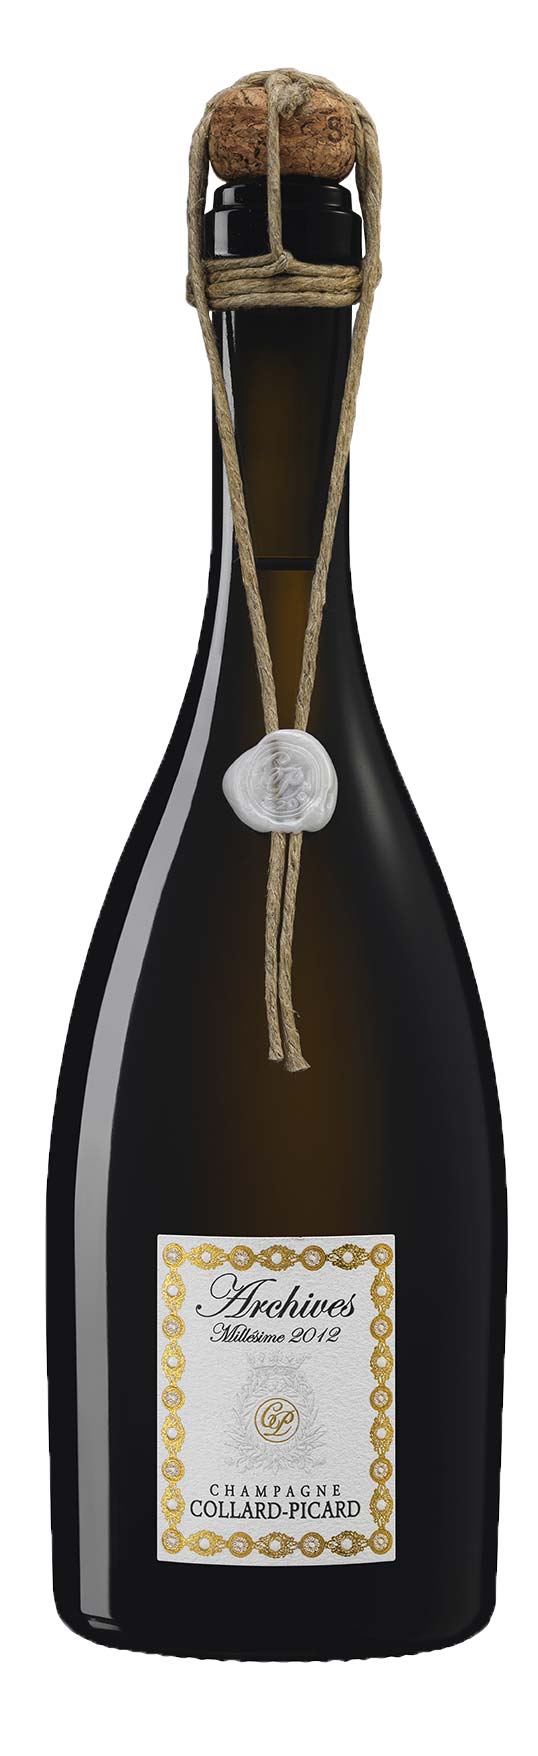 Champagne Collard-Picard Archives 2012